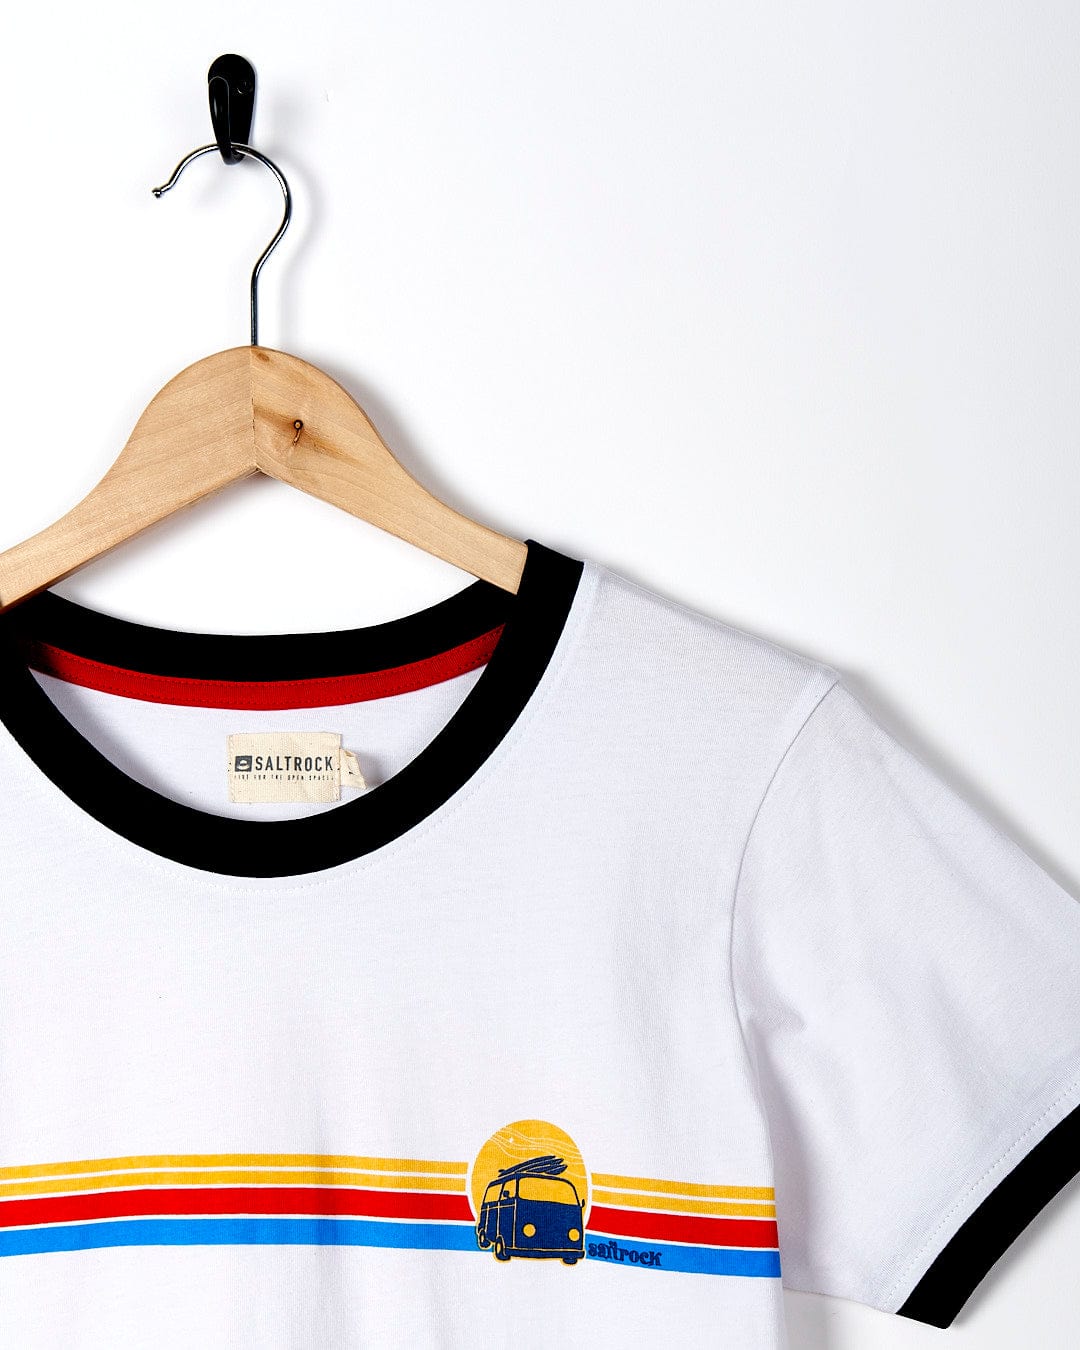 A Celeste Stripe - Womens Ringer Tee - White from Saltrock with a yellow and red design on a white shirt.